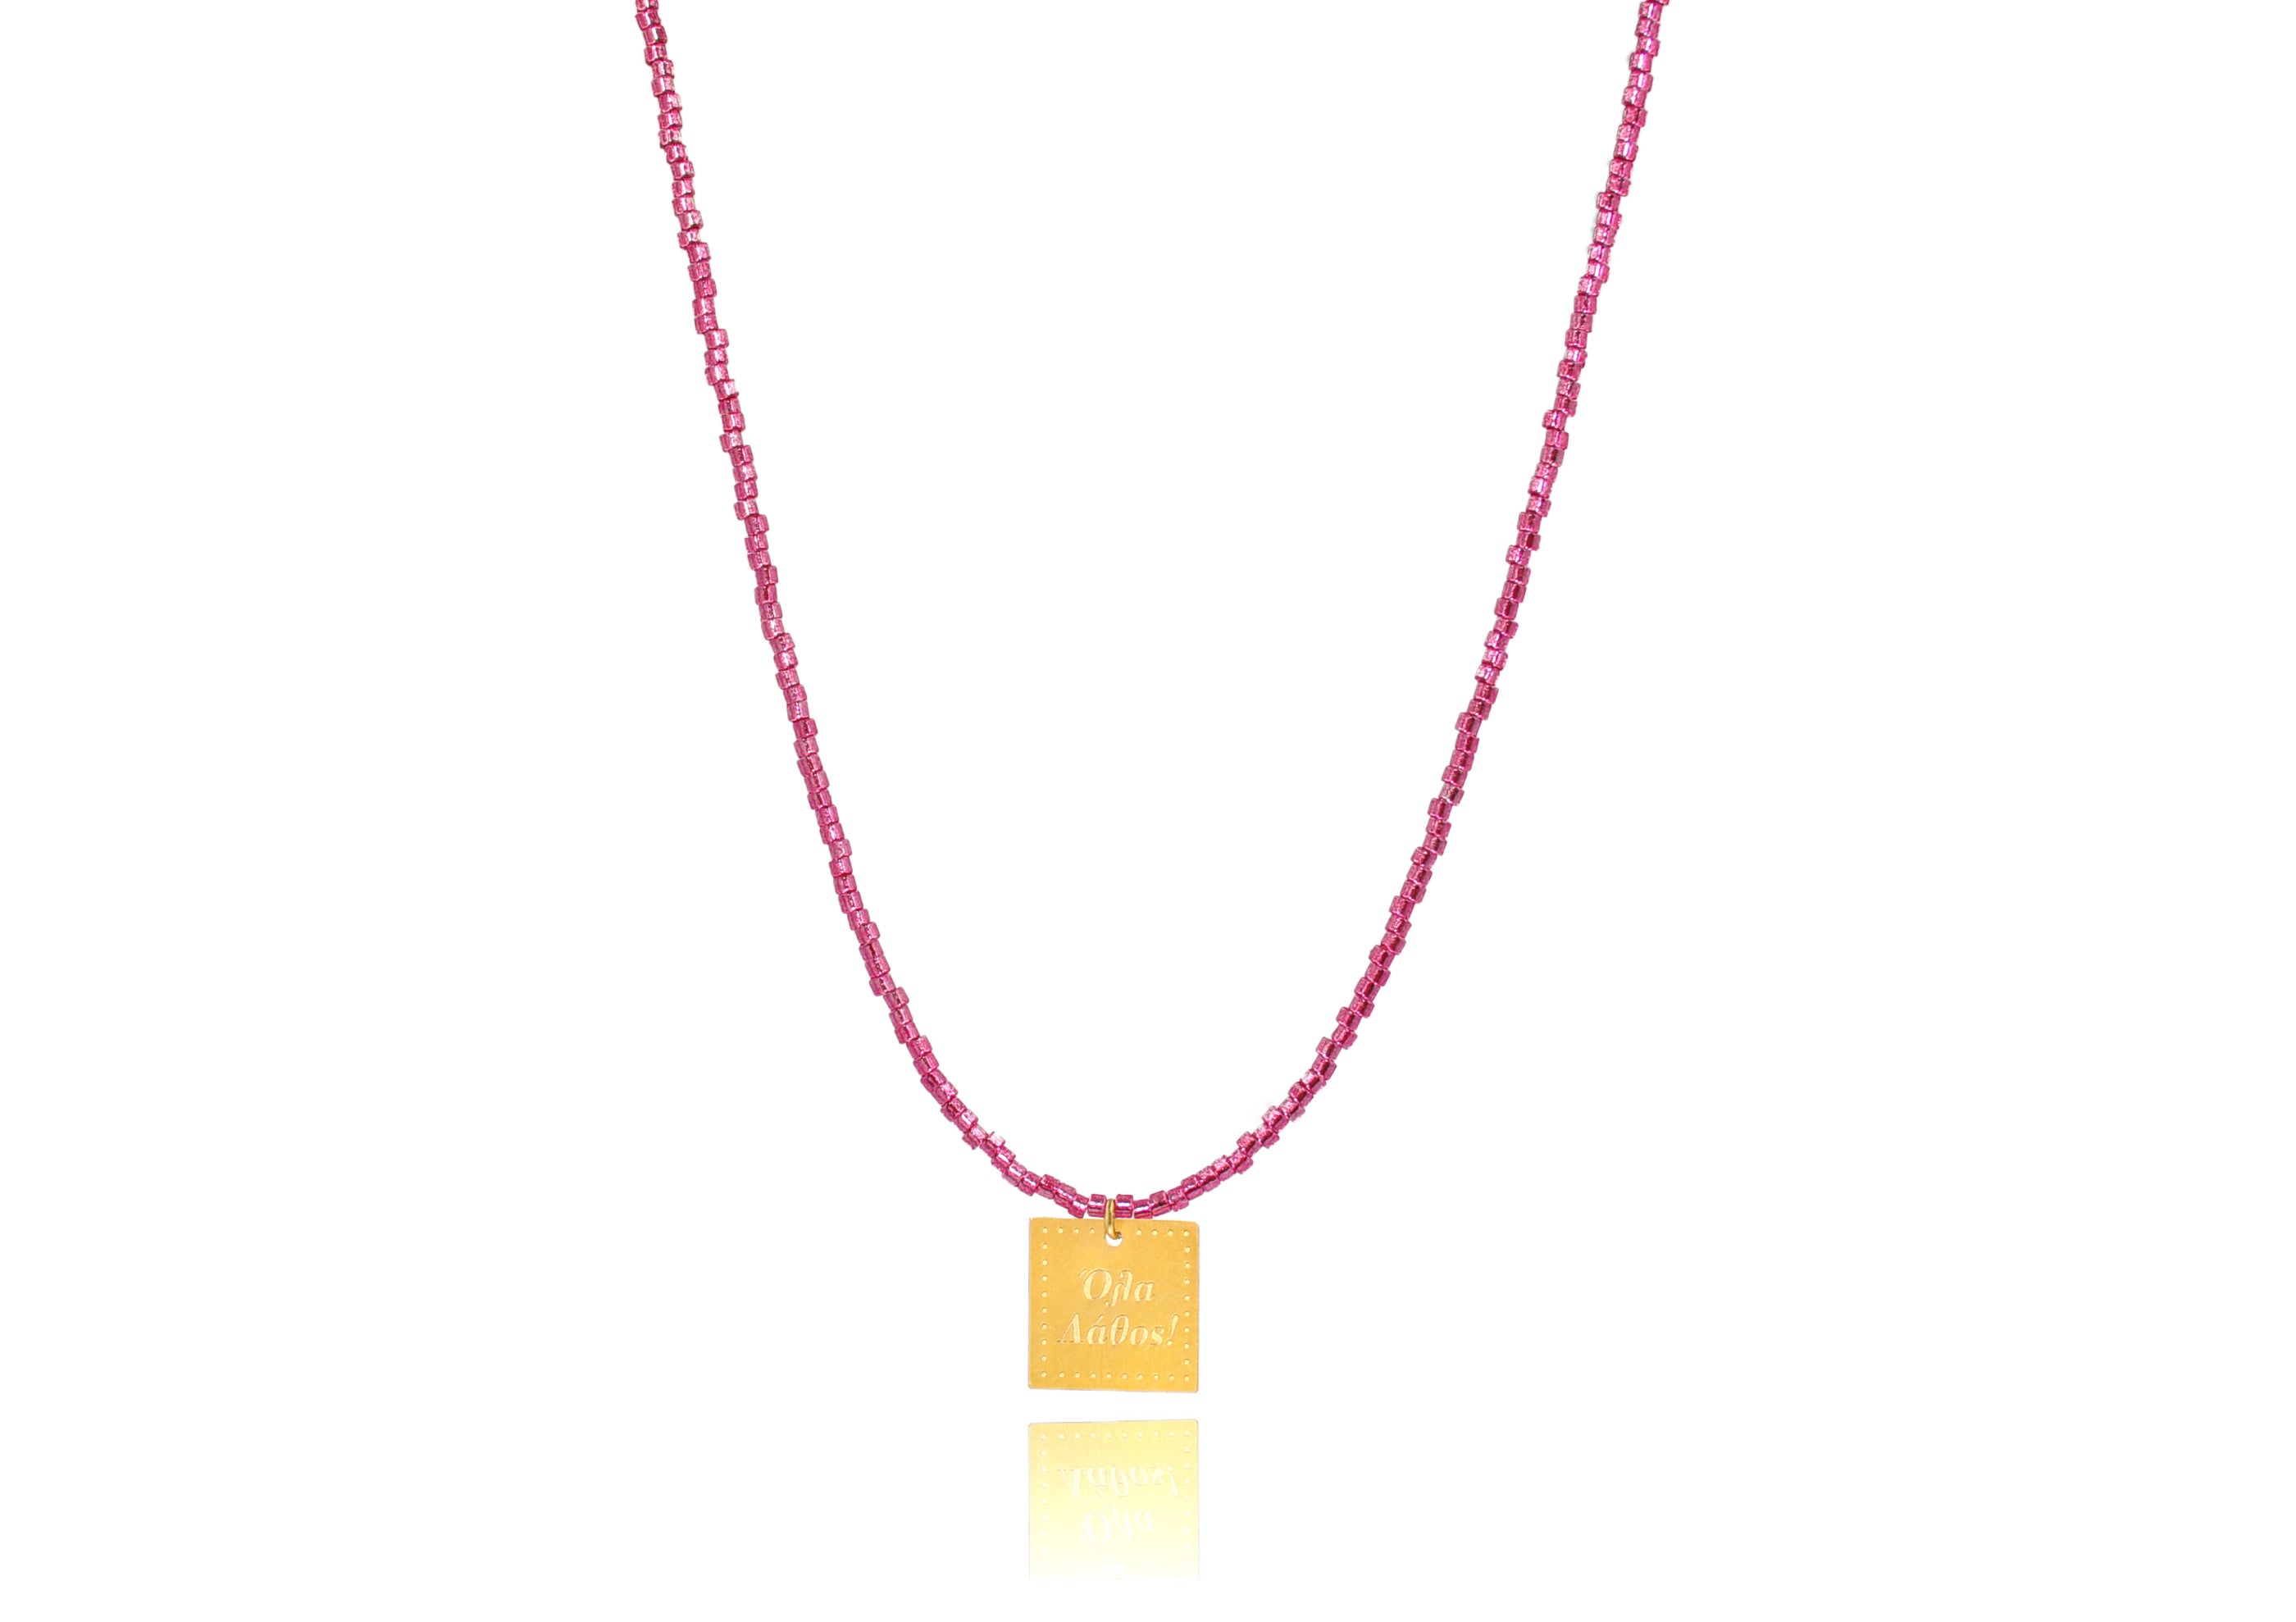 A necklace made of fucshia japanese miyuki beads and a squared silver 925 charm plated in gold 24K, with a message´´όλα λάθος'' -'It's all wrong! .